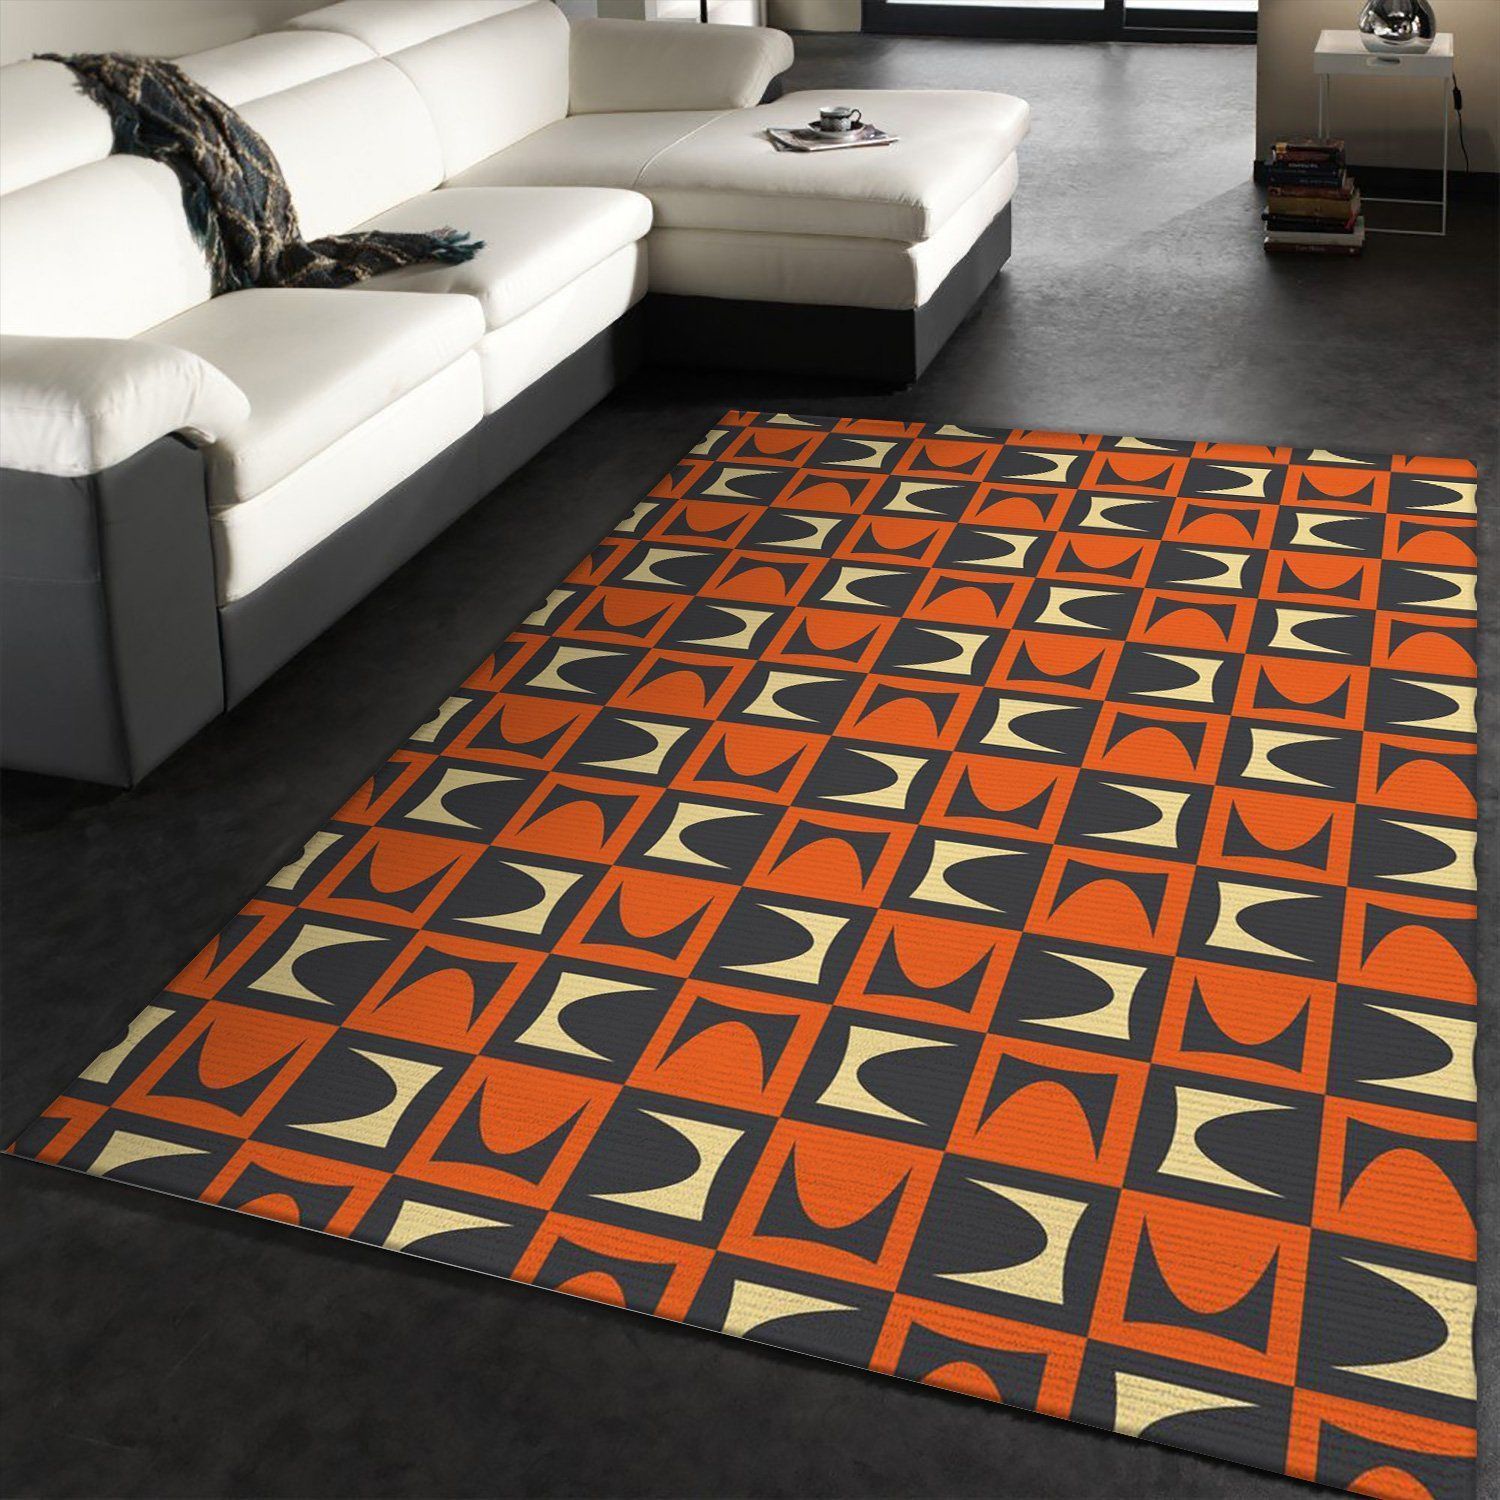 Midcentury Pattern 36 Area Rug Carpet, Living room and bedroom Rug, Home US Decor - Indoor Outdoor Rugs